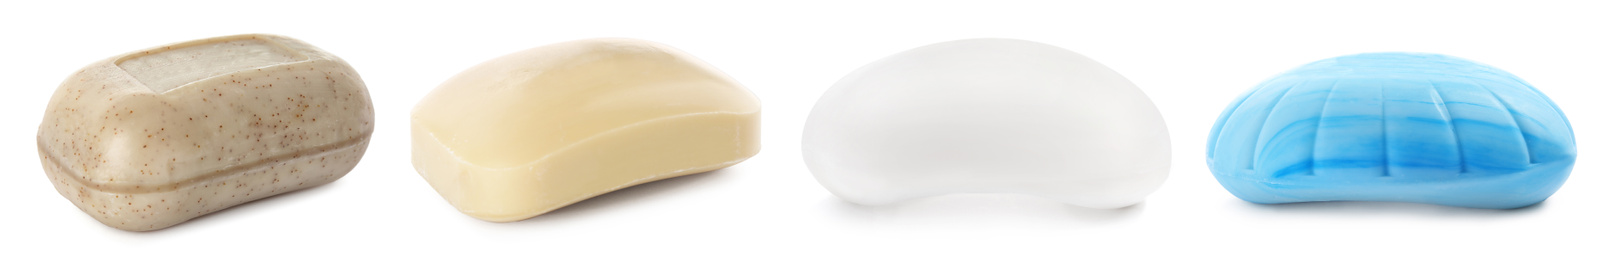 Image of Set of different soap bars on white background. Banner design